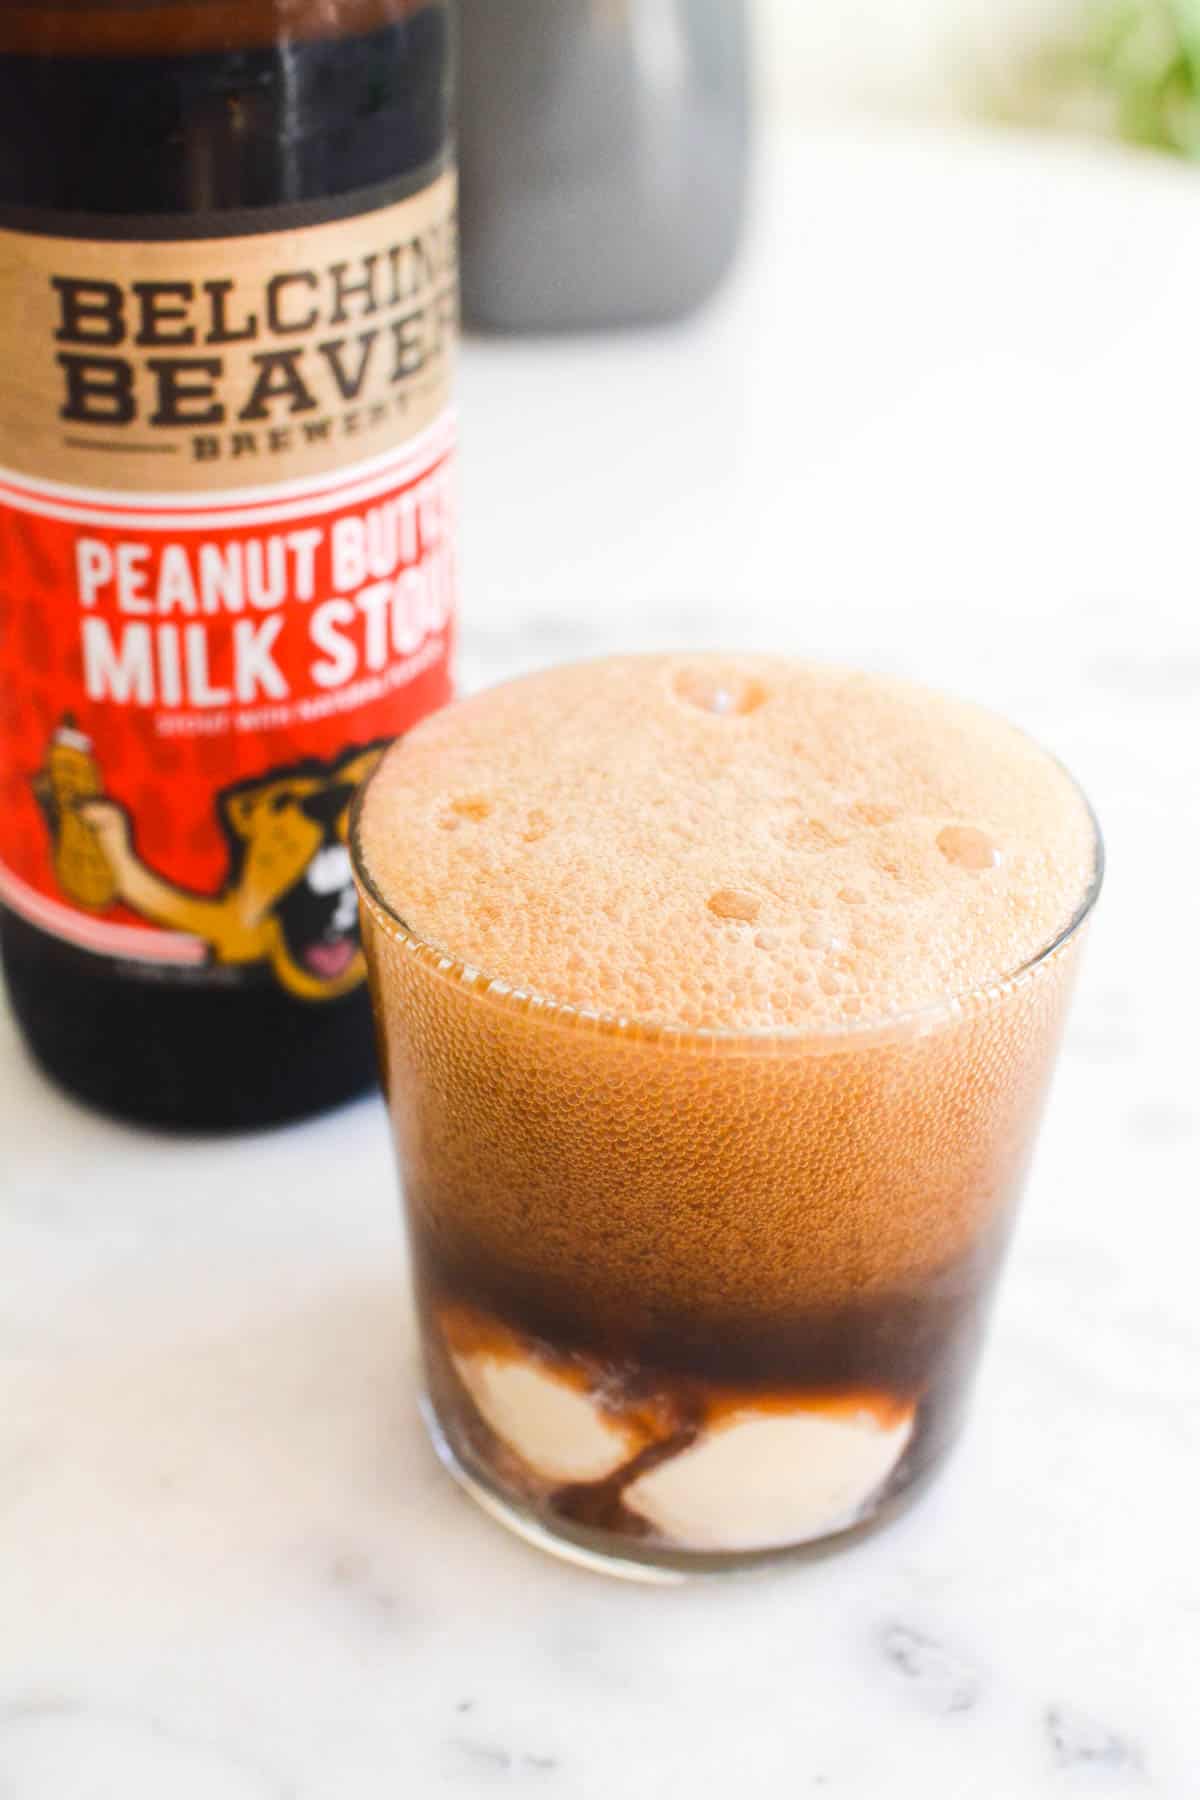 Close up of a glass holding ice cream and topped with foamy beer.